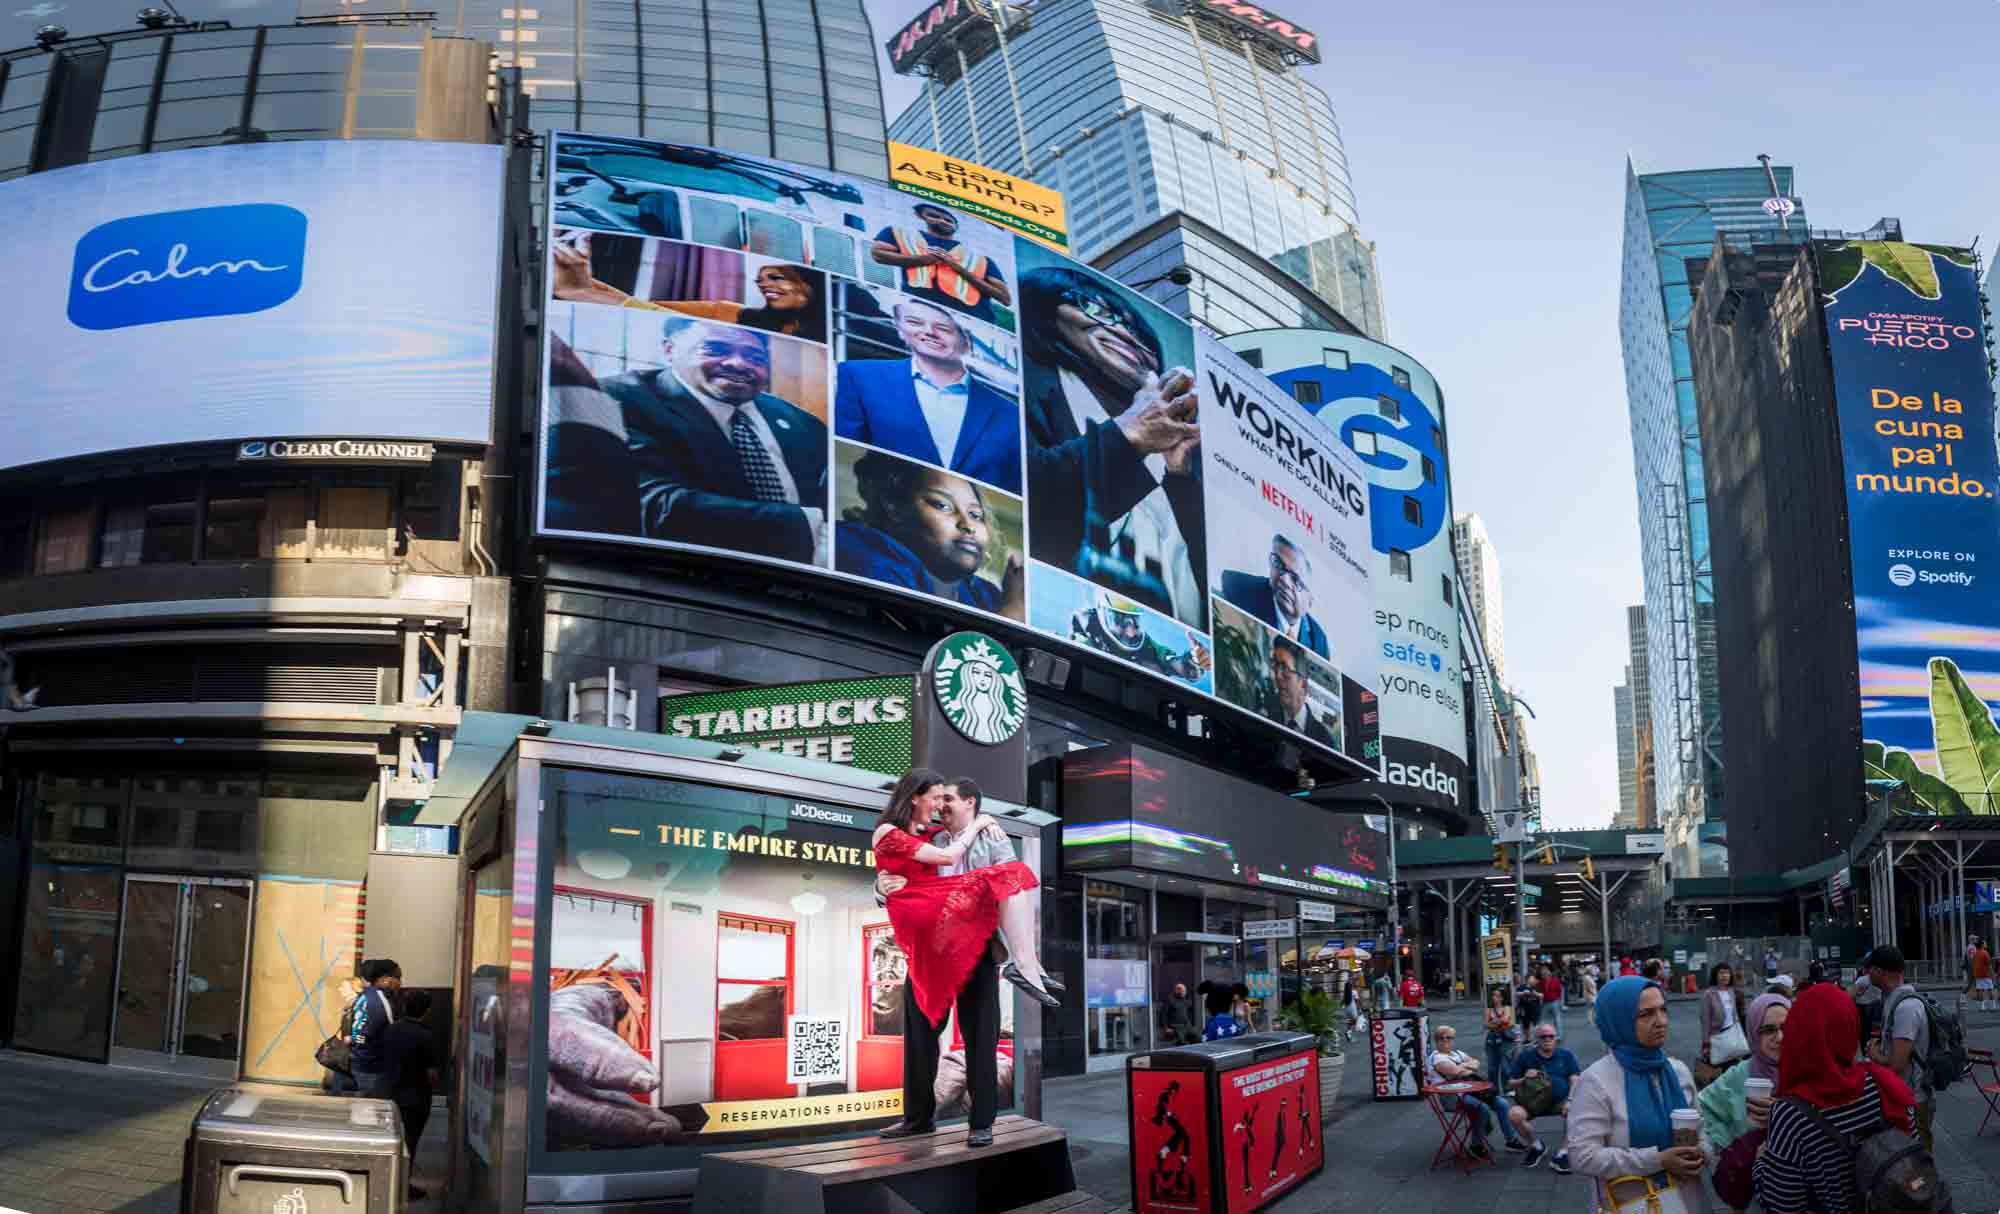 Man holding woman wearing red dress on platform in Times Square in front of colorful billboards